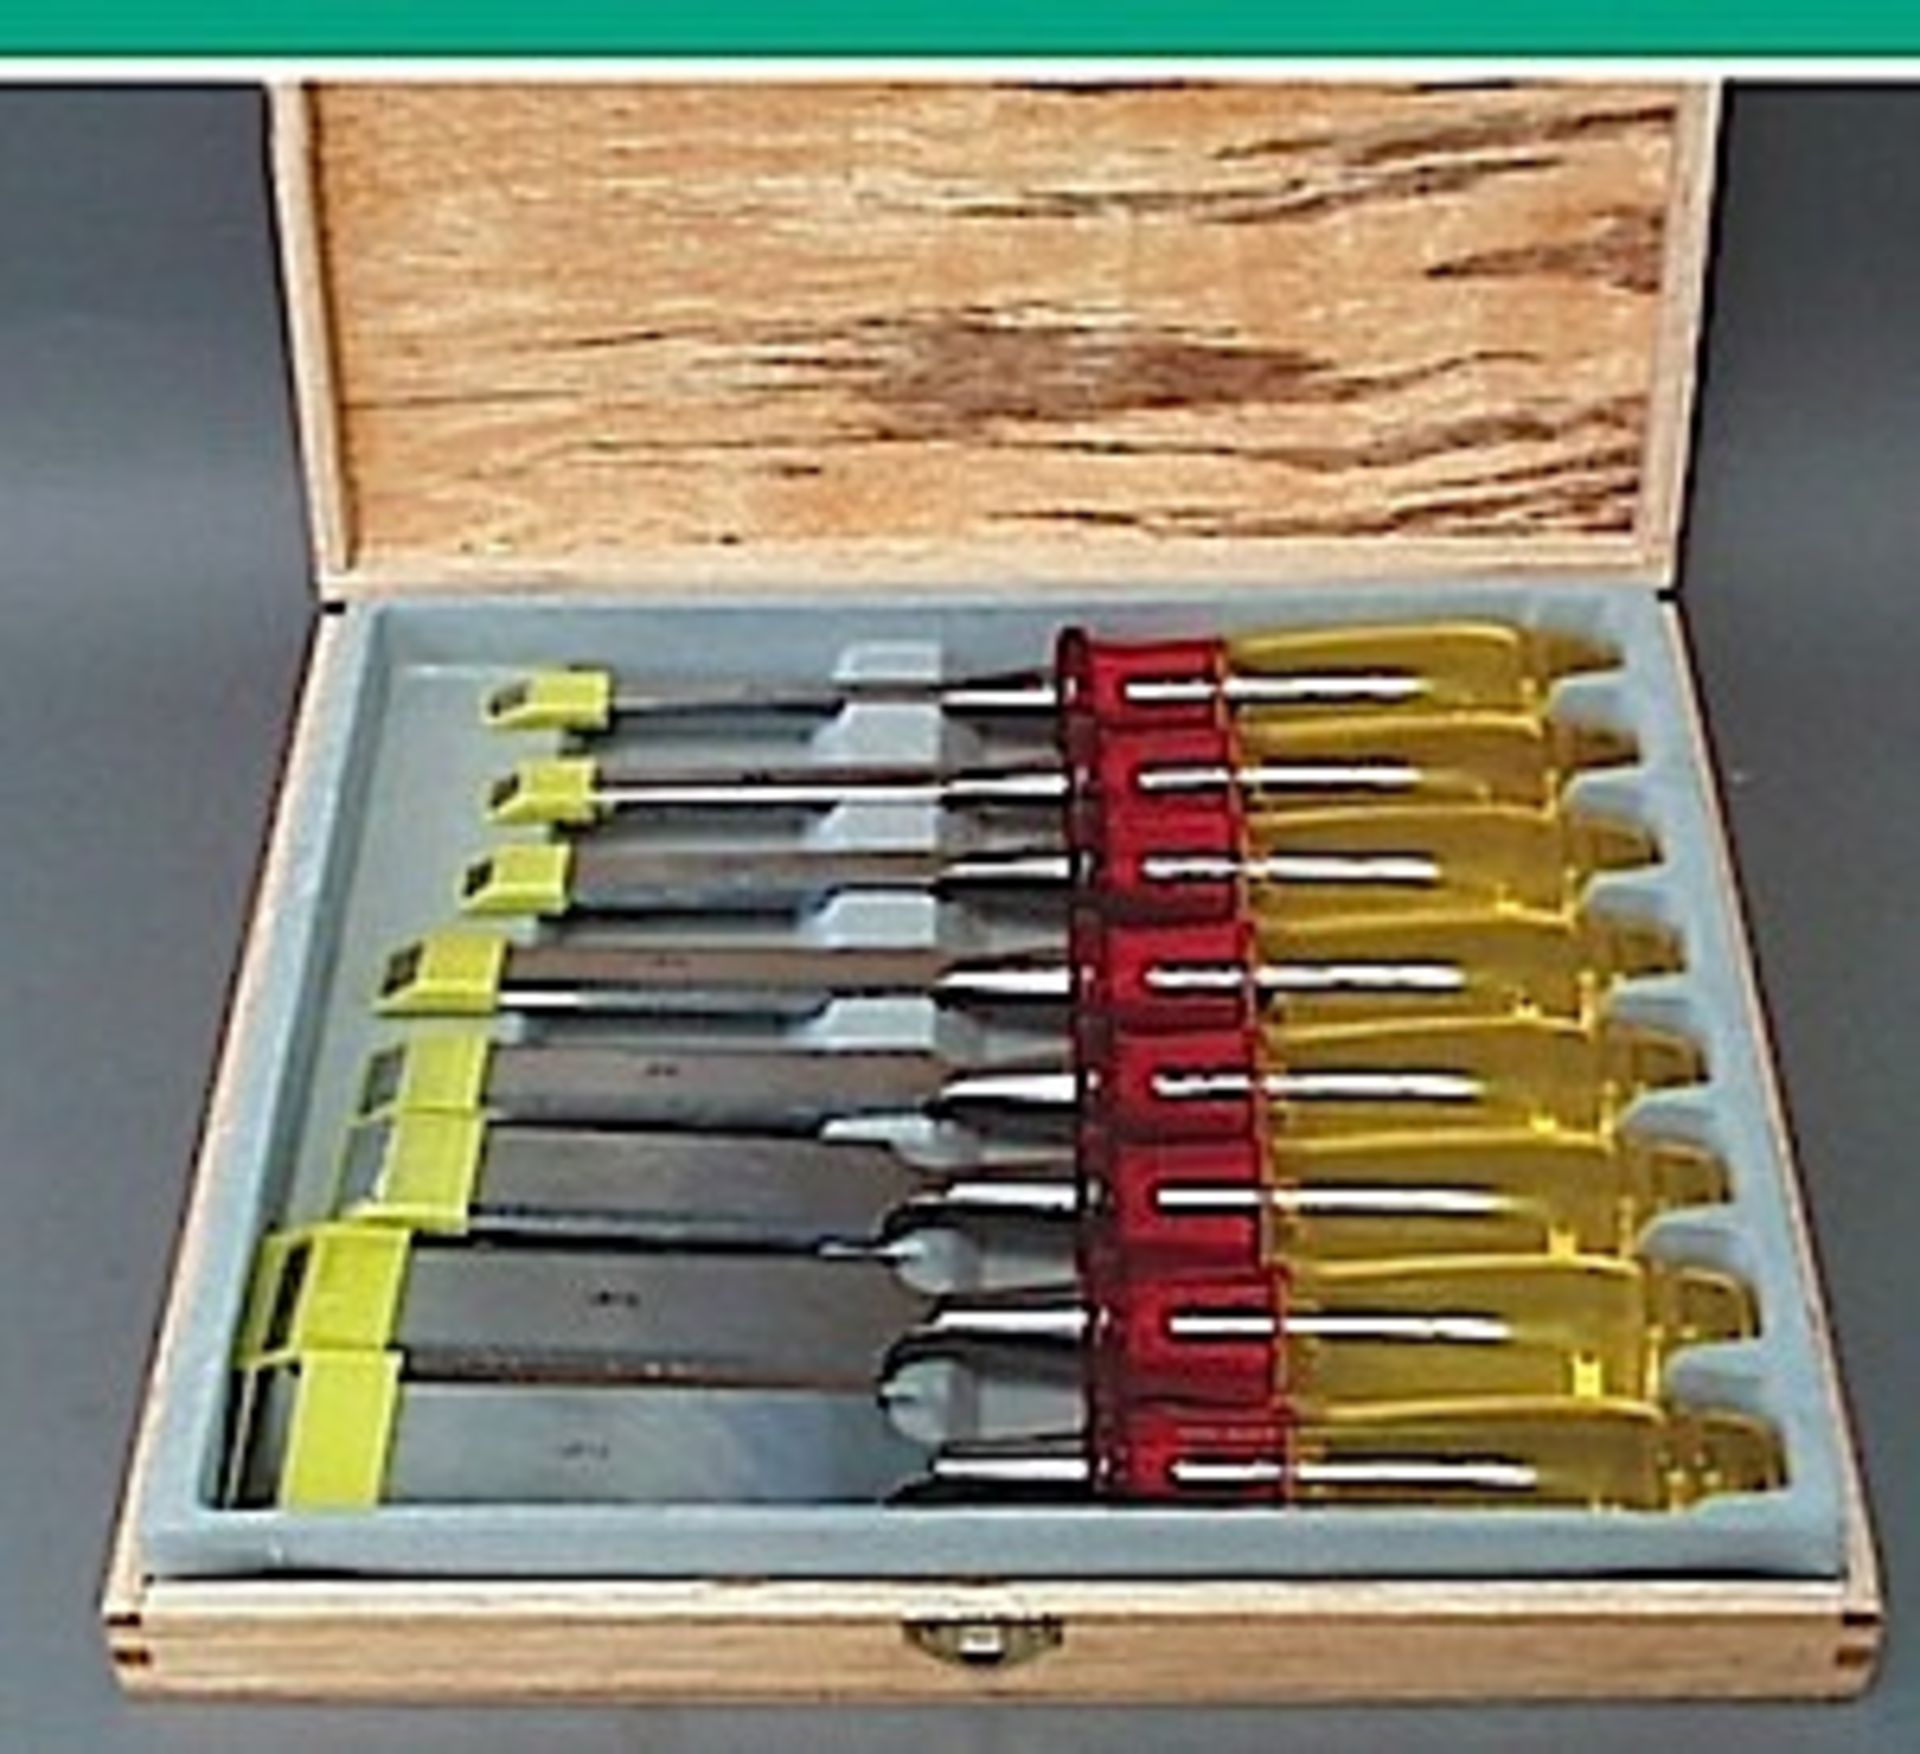 V *TRADE QTY* Brand New Eight Piece Professional Chisel Set With Wooden Storage Case X 4 YOUR BID - Image 2 of 2